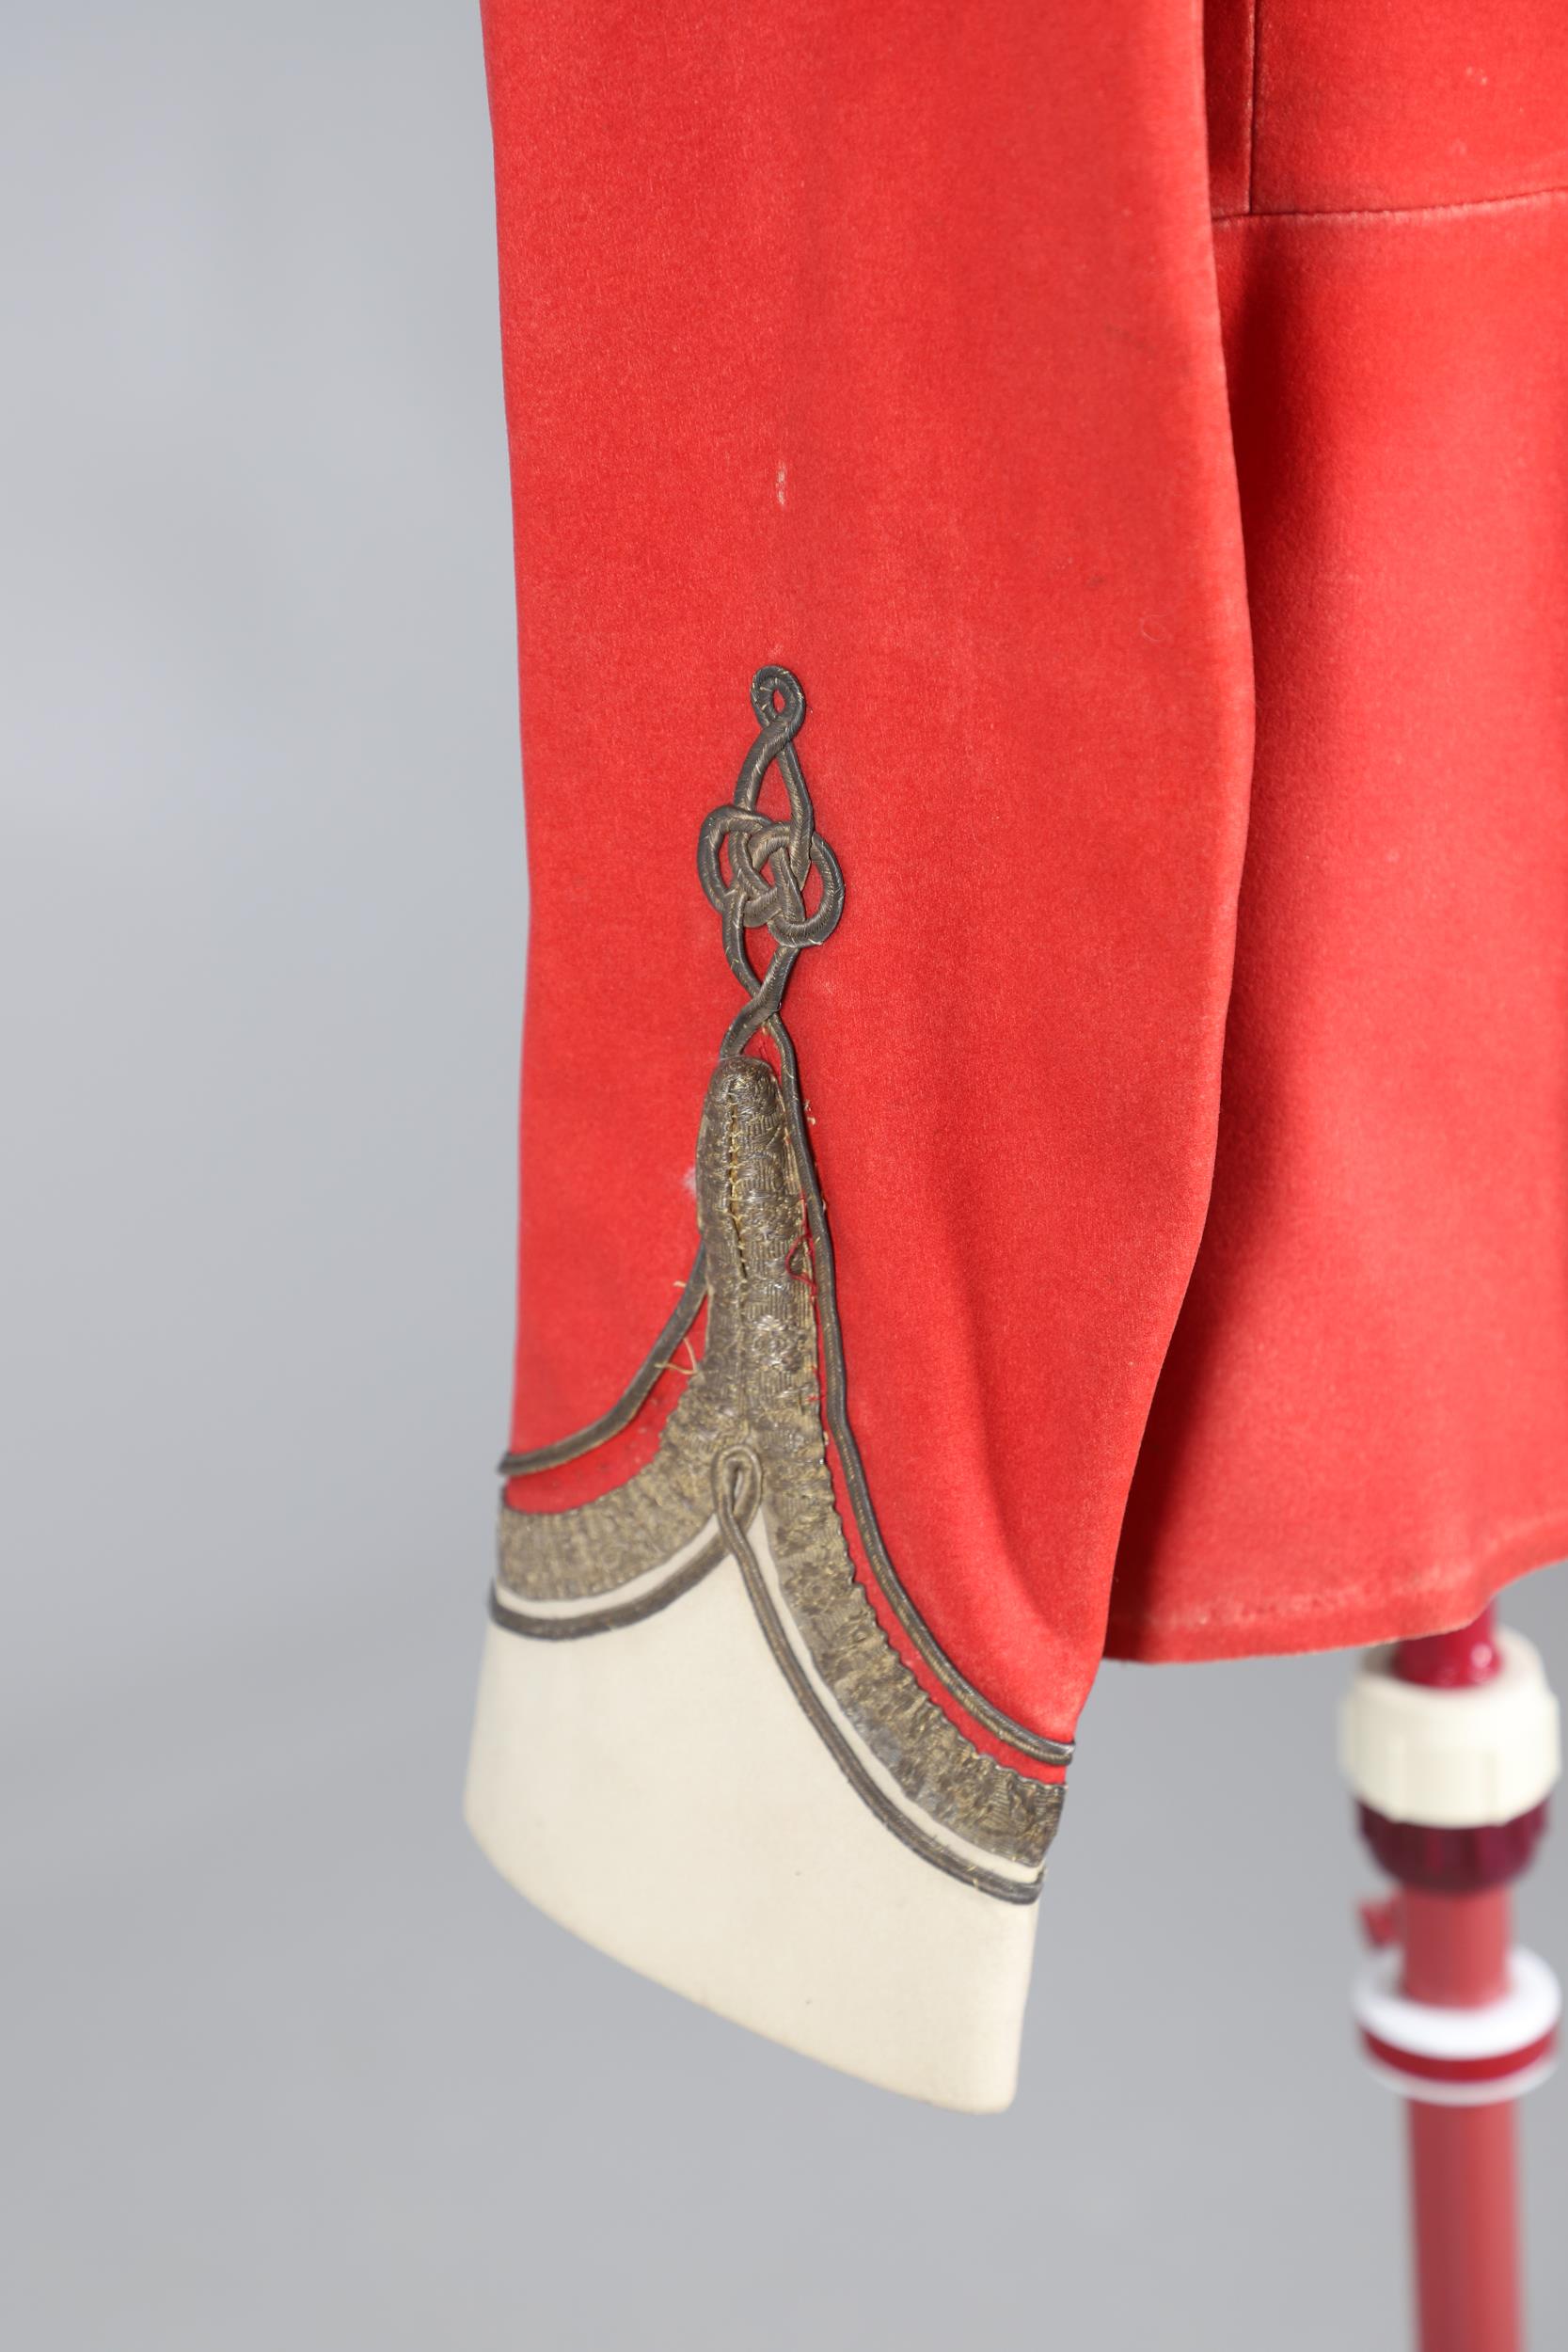 AN EARLY 20TH CENTURY SCARLET TUNIC FOR THE WORCESTER REGIMENT. - Image 10 of 16